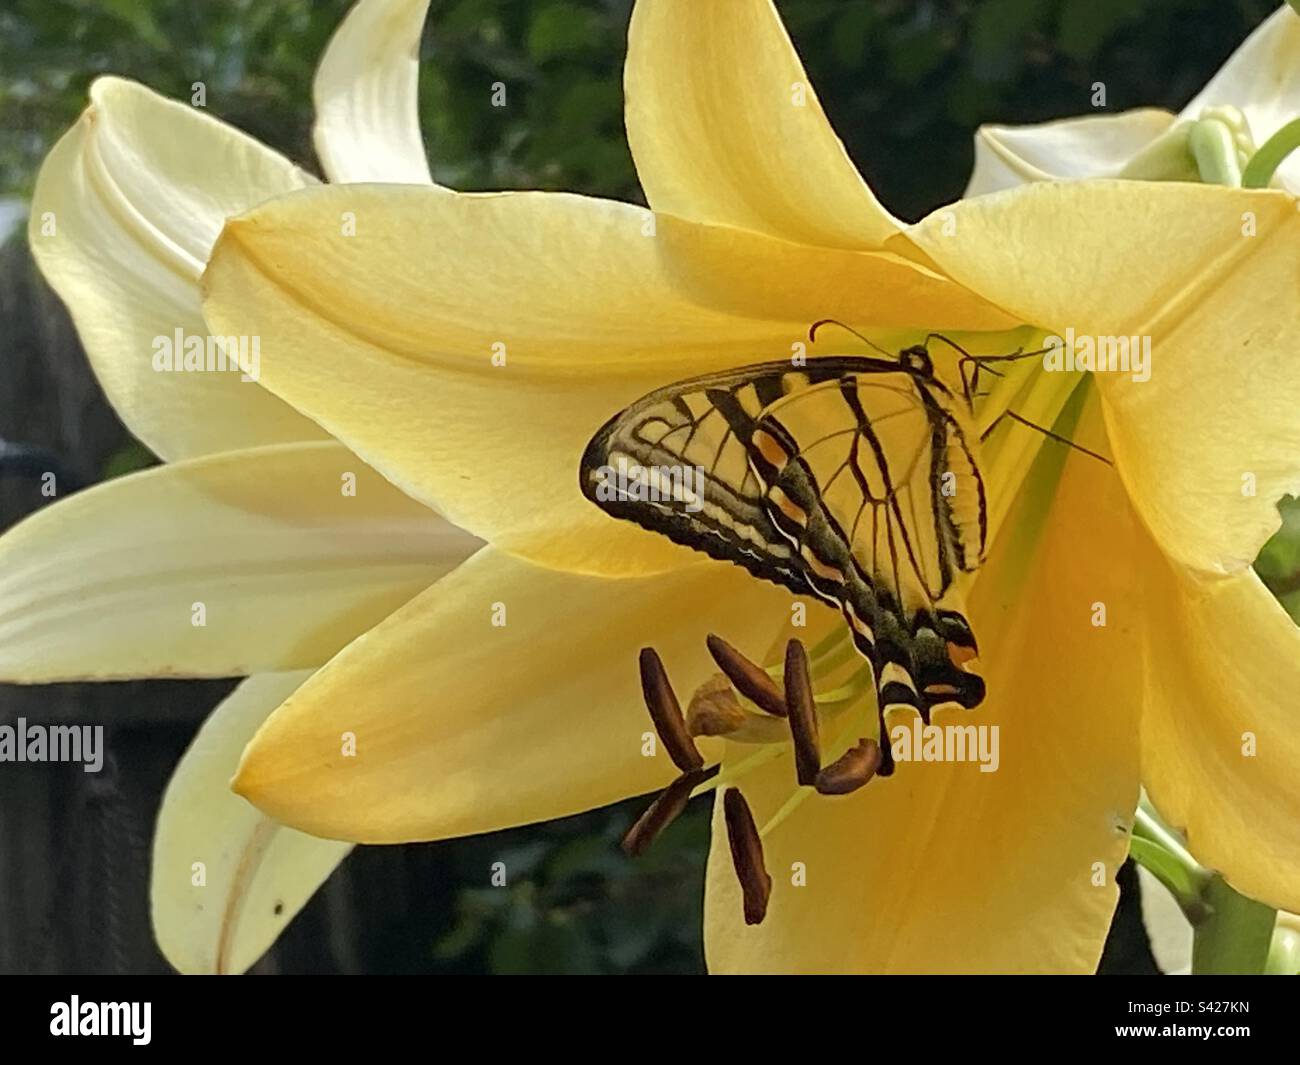 Yellow and black eastern tiger swallowtail butterfly feeding in a yellow lily plant. Stock Photo